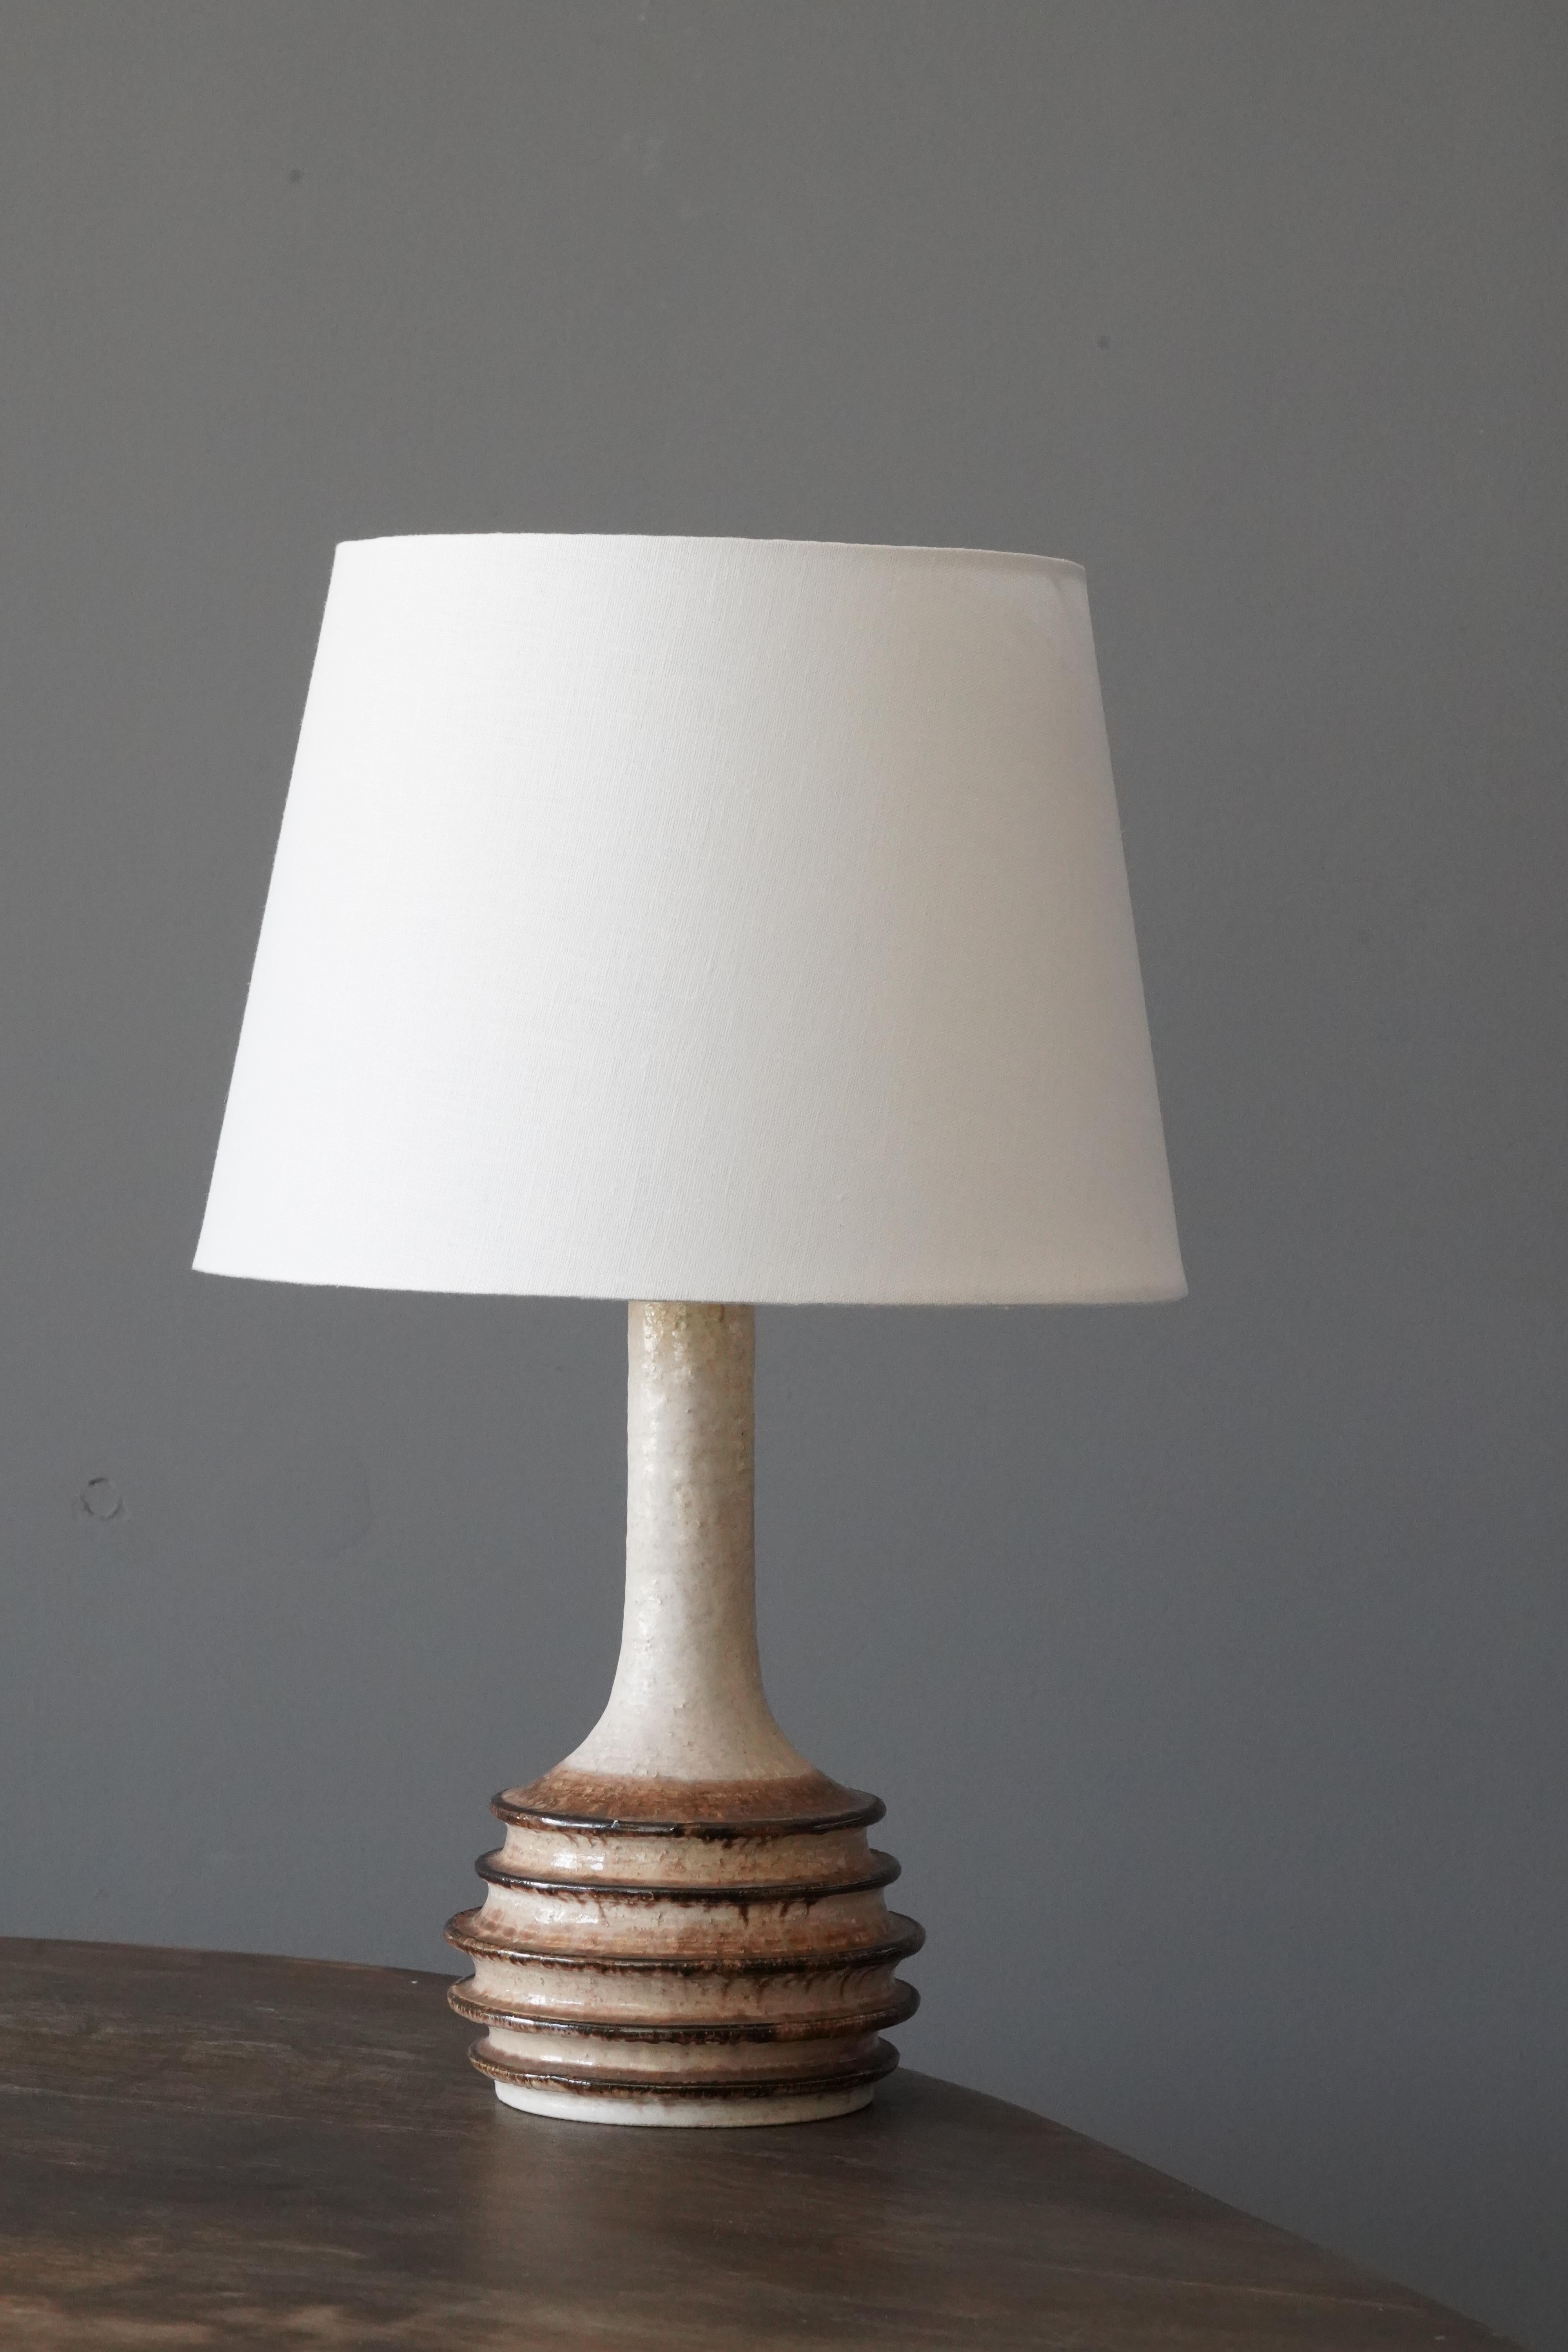 A stoneware lamp, produced by Jette Hellerøe, Denmark 1960, signed. 

Sold without lampshade. Dimensions exclude lampshade, height includes socket.

Glaze features white-brown colors.

Other ceramicists of the period include Axel Salto, Wilhelm